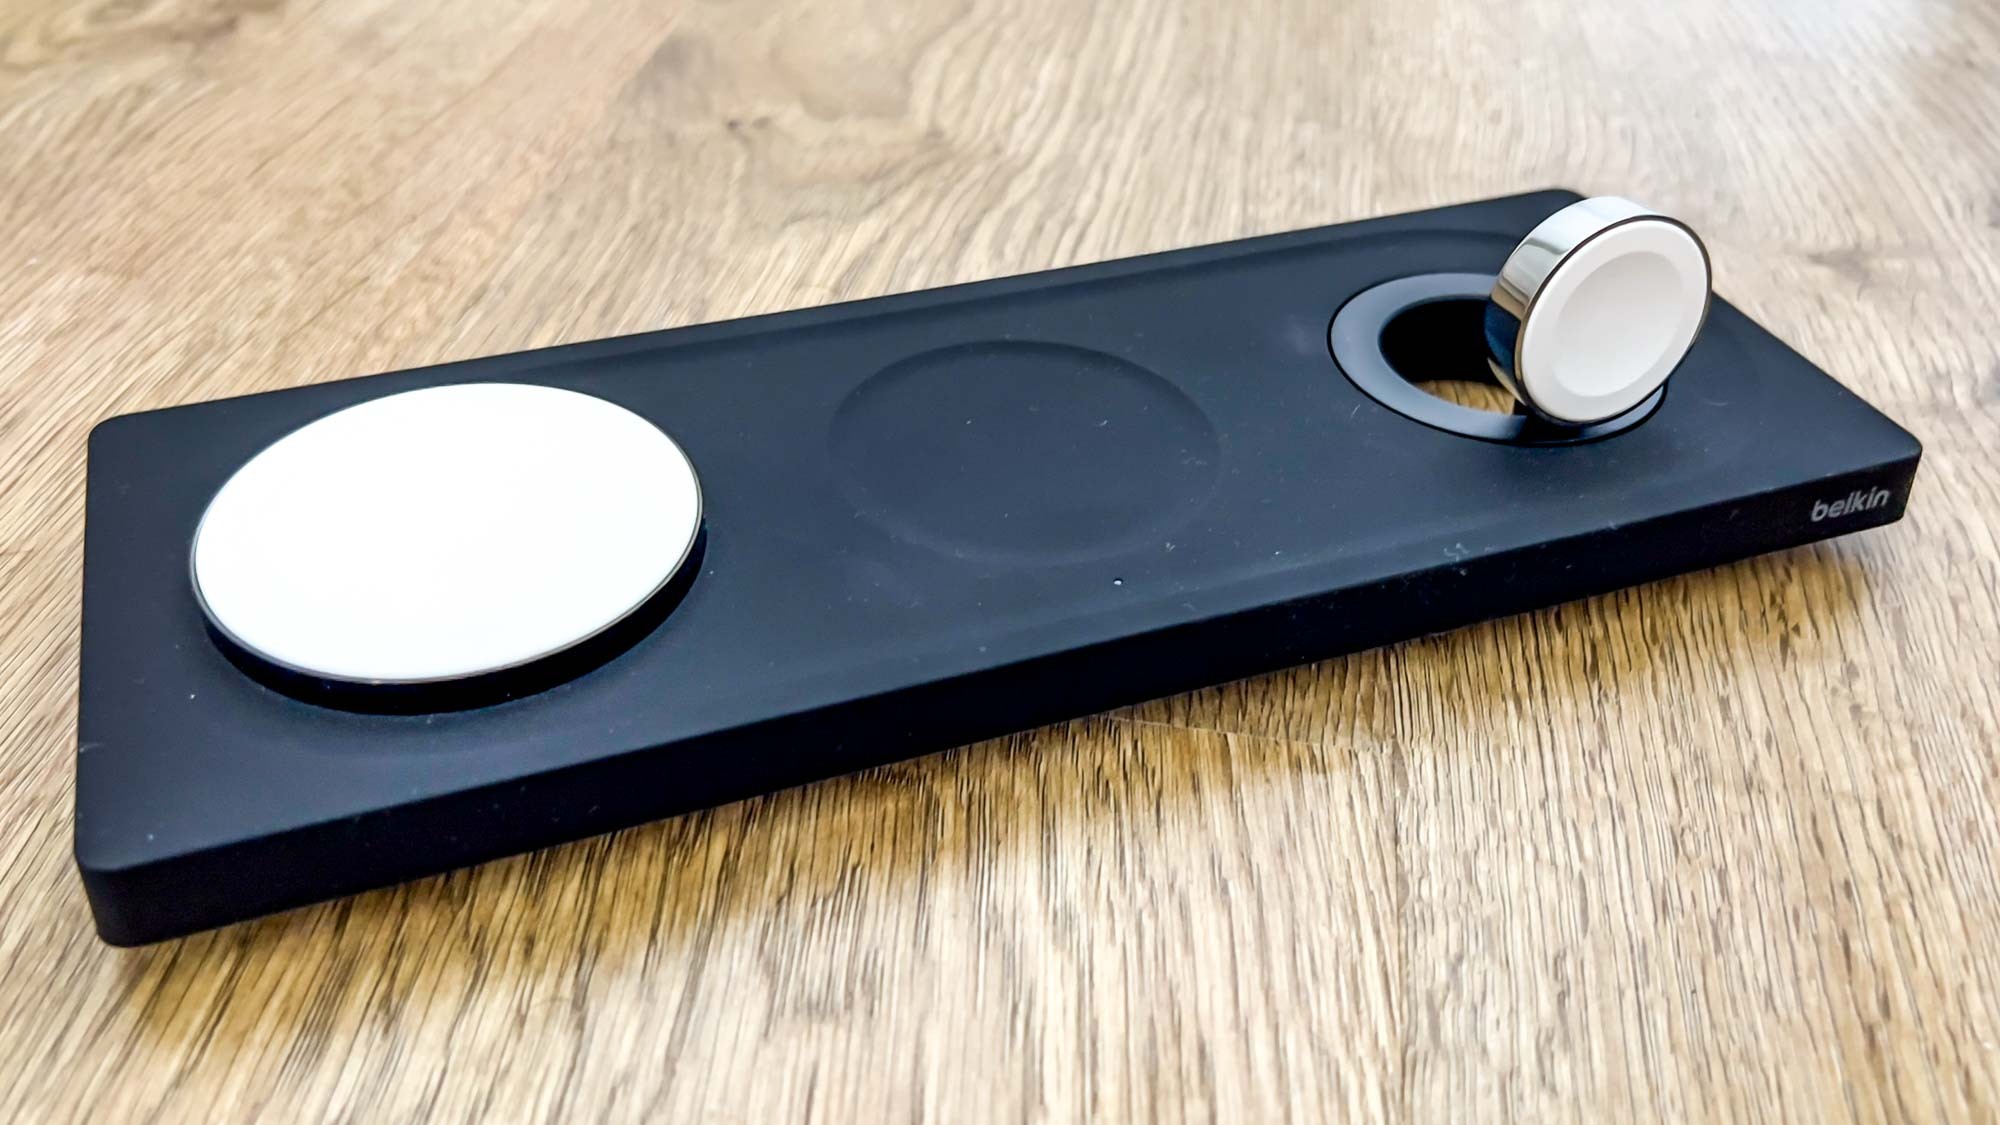 The Belkin BoostCharge Pro 3-in-1 Wireless Charging Pad with MagSafe in black on a wooden surface